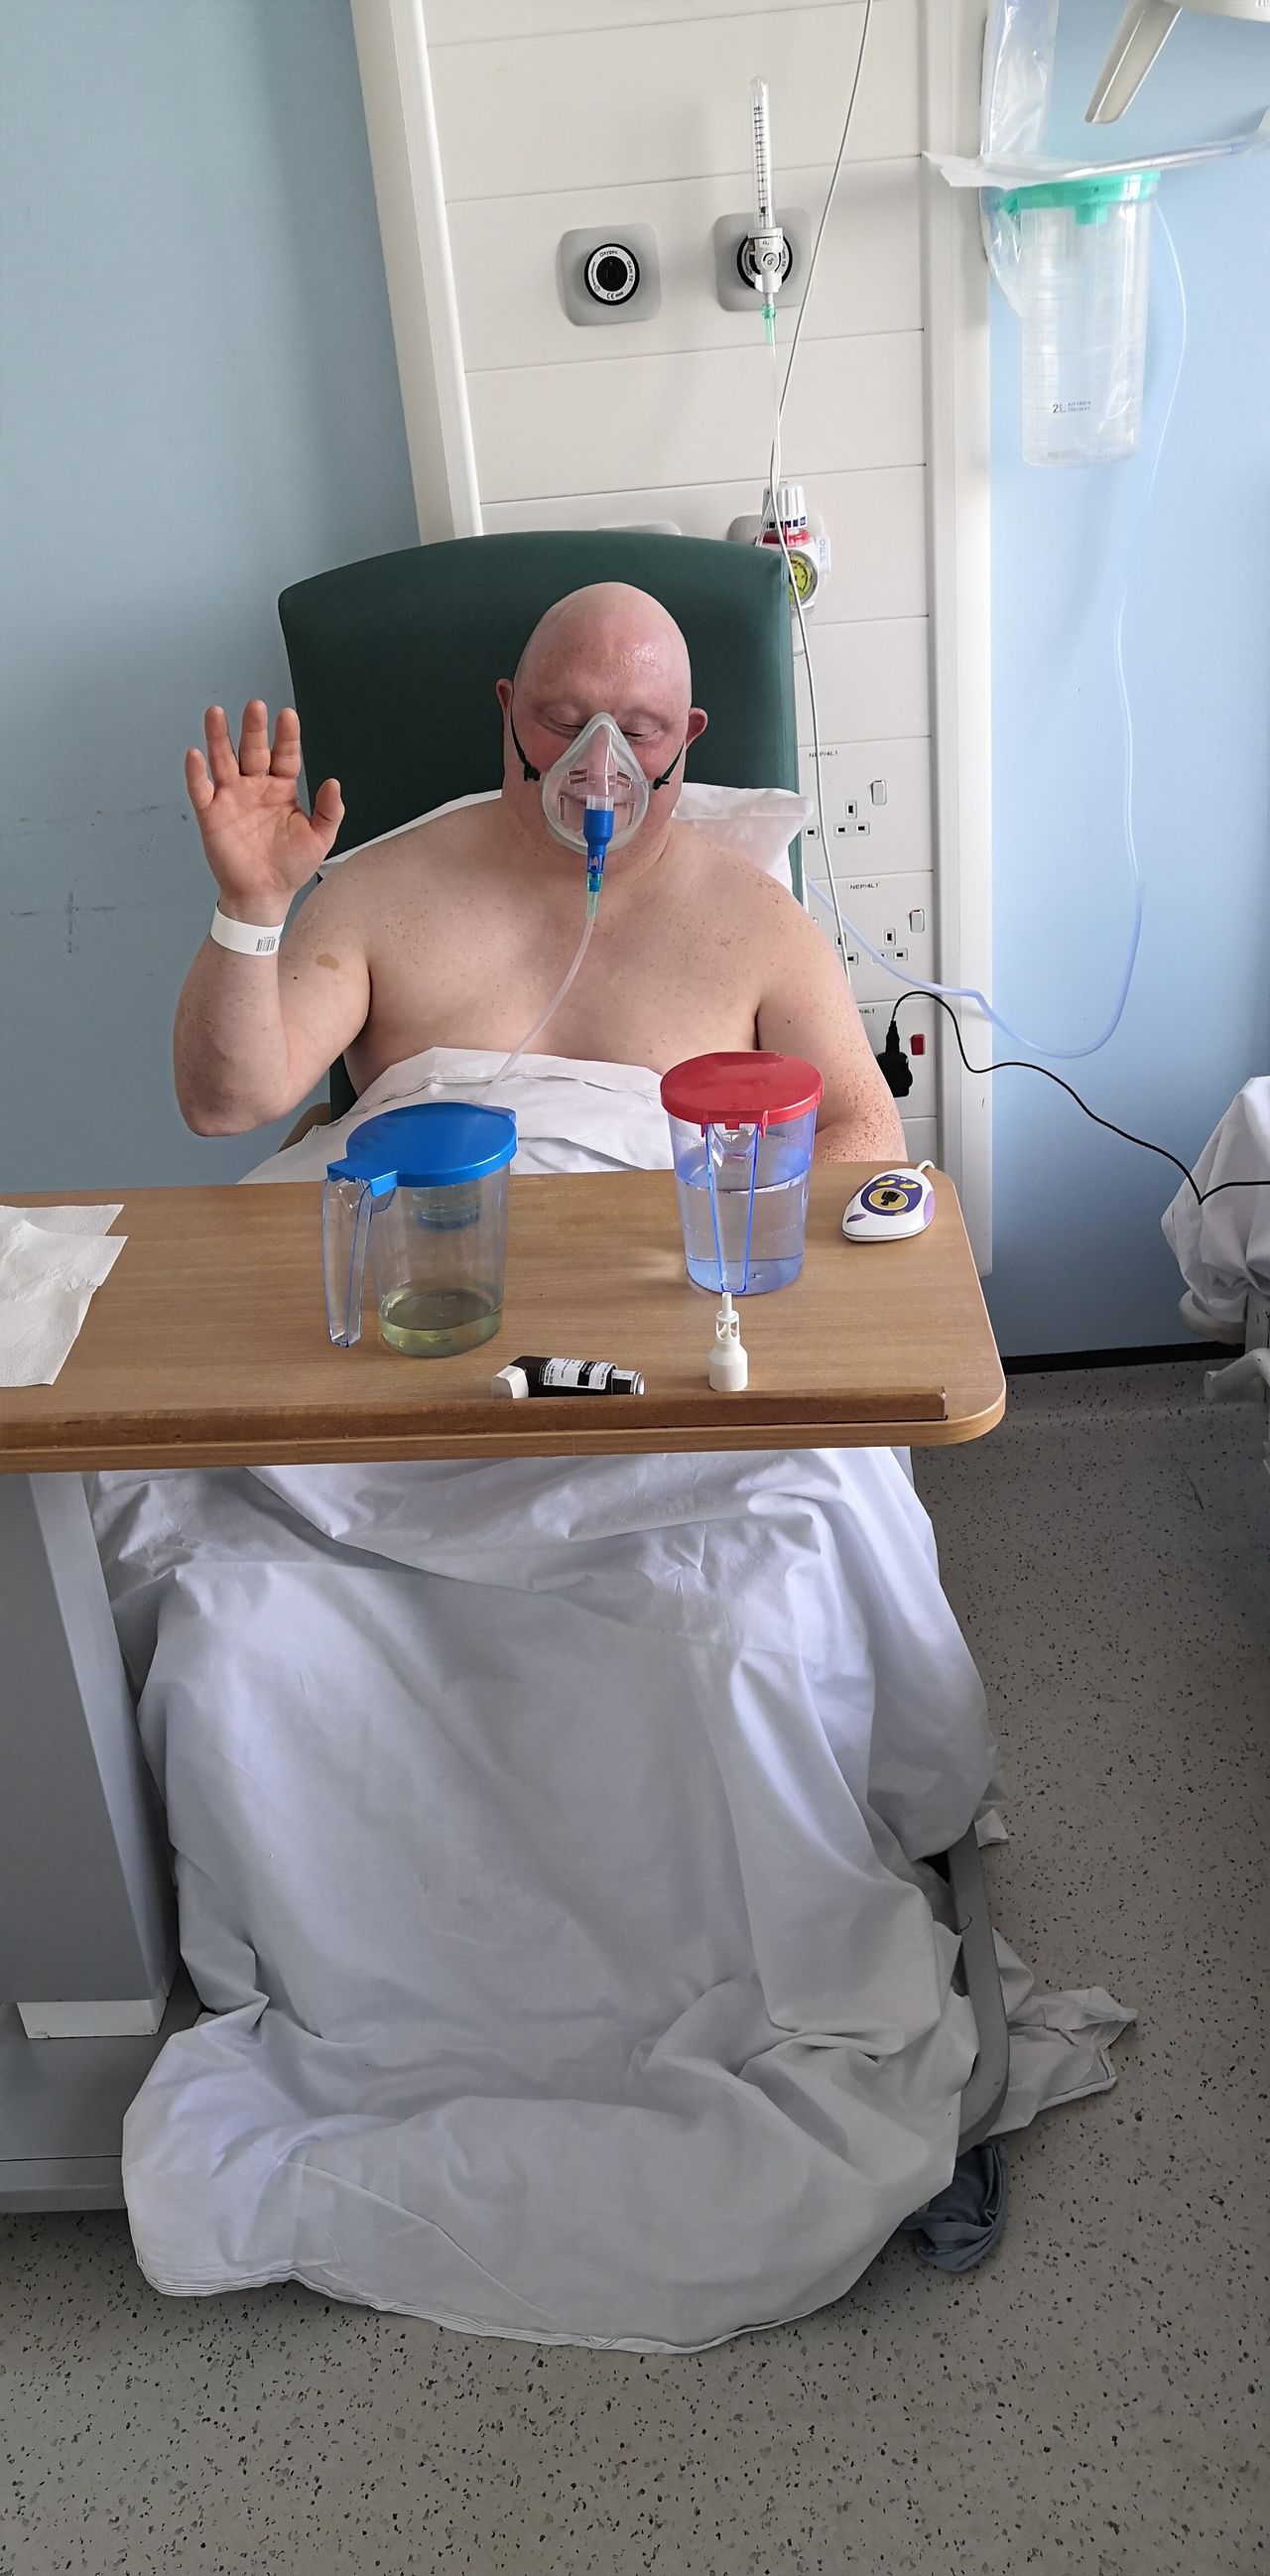 Steven, 43, has Down’s syndrome and was admitted to hospital and tested positive. His father John was informed Steven would not be given a ventilator if he needed one.